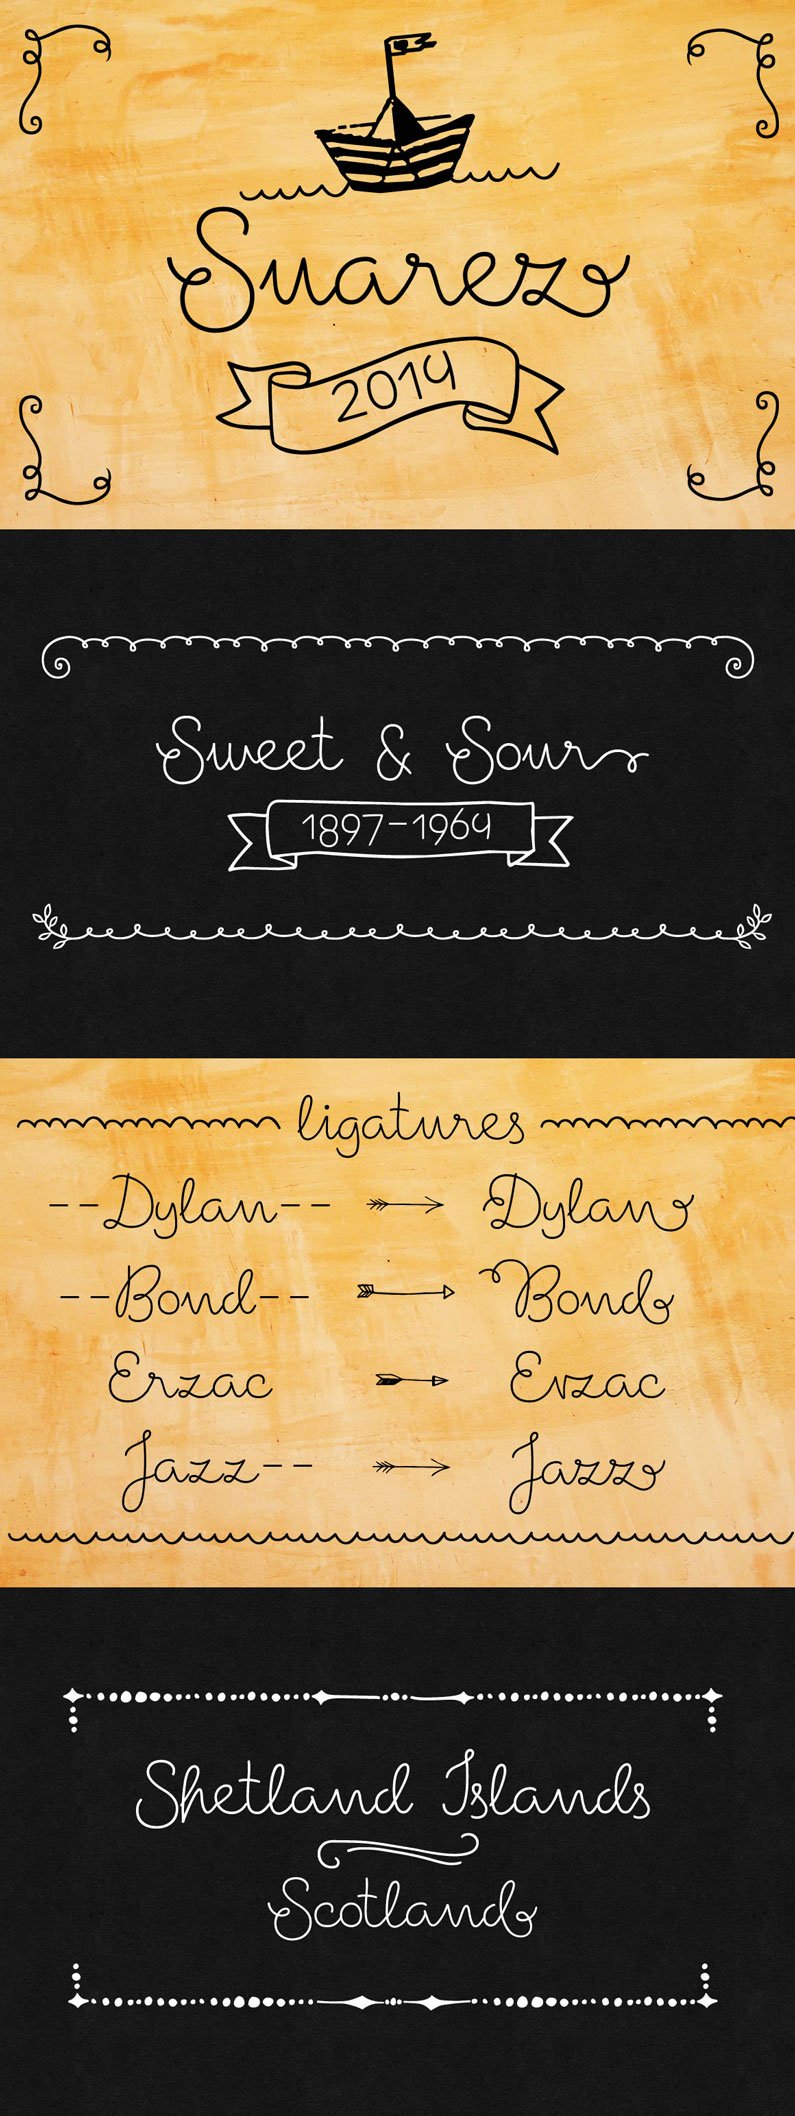 Suarez is a handwritten, fully connected script with ligatures to help with flow and readability. It can be used for invitations, greeting cards, posters, advertising, weddings, books, menus etc. 